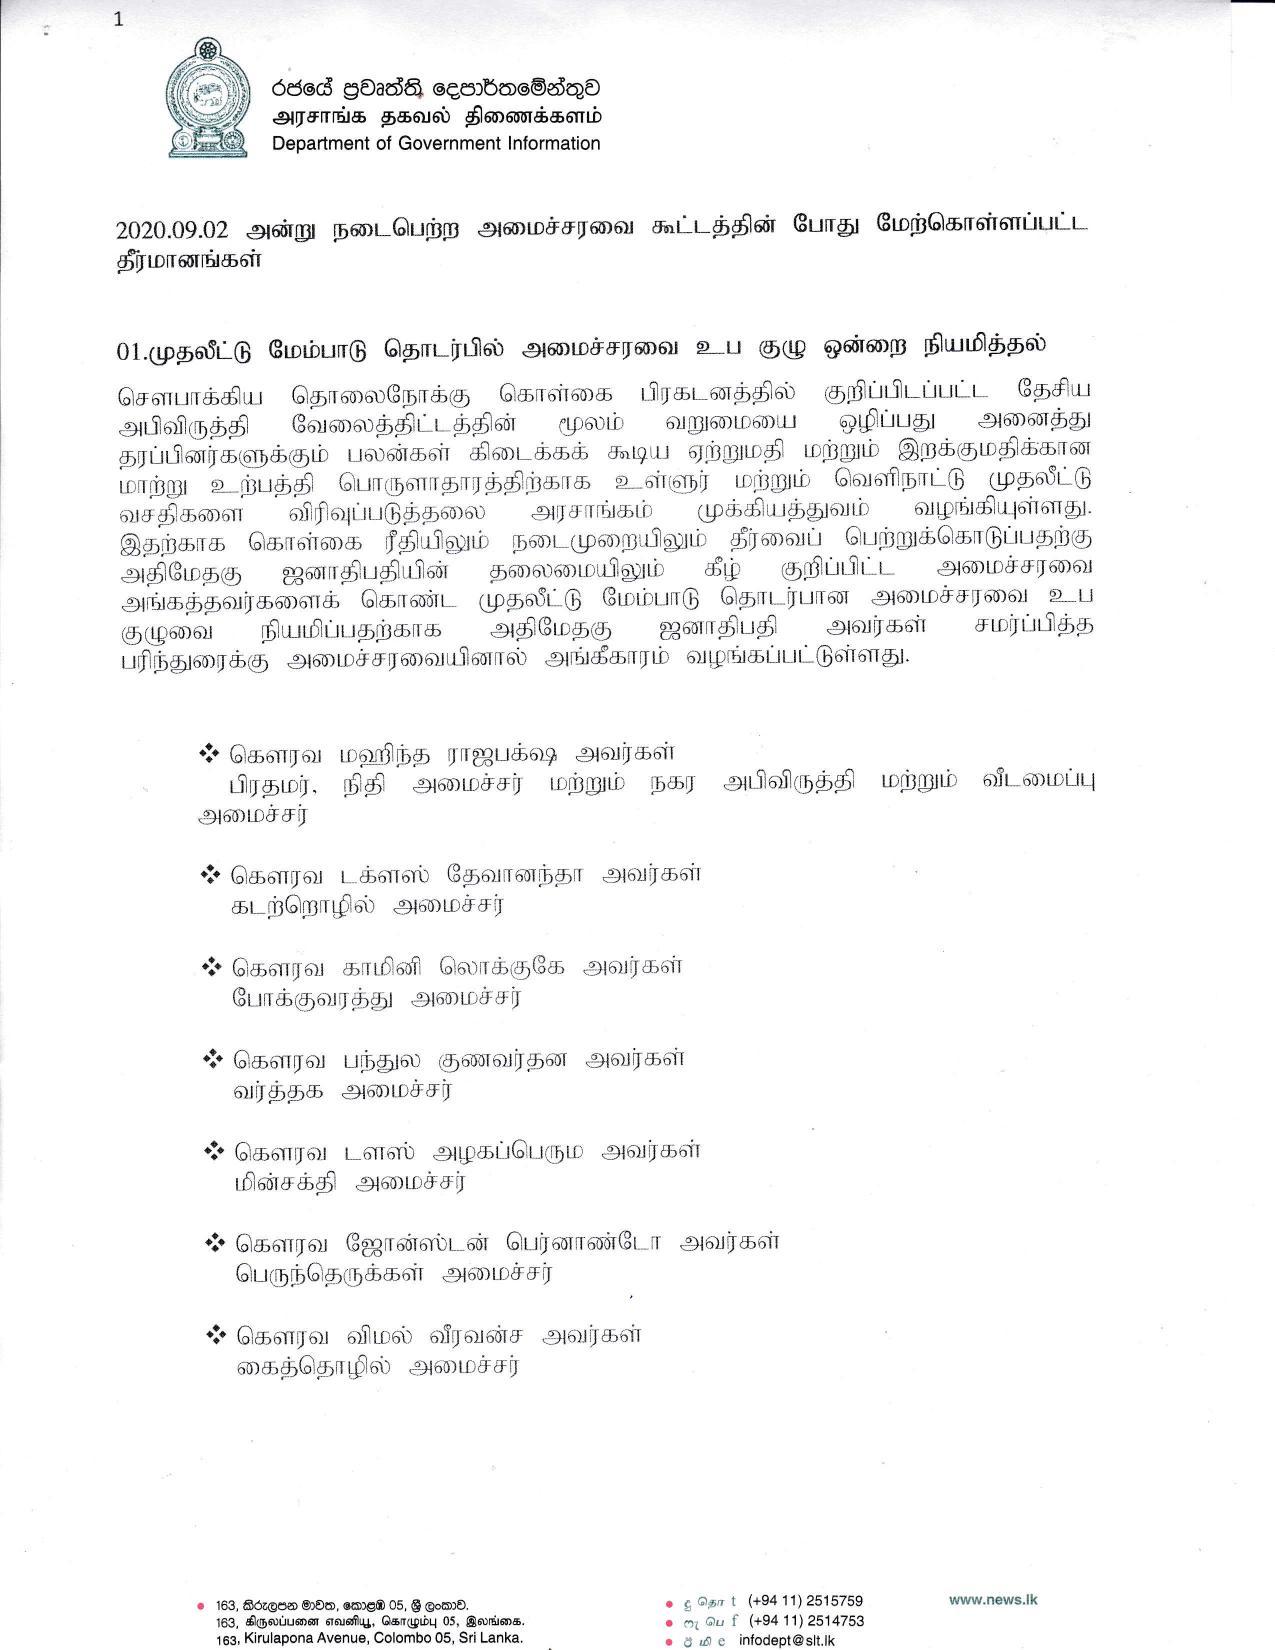 Cabinet Decision on 02.09.2020 Tamil min page 001